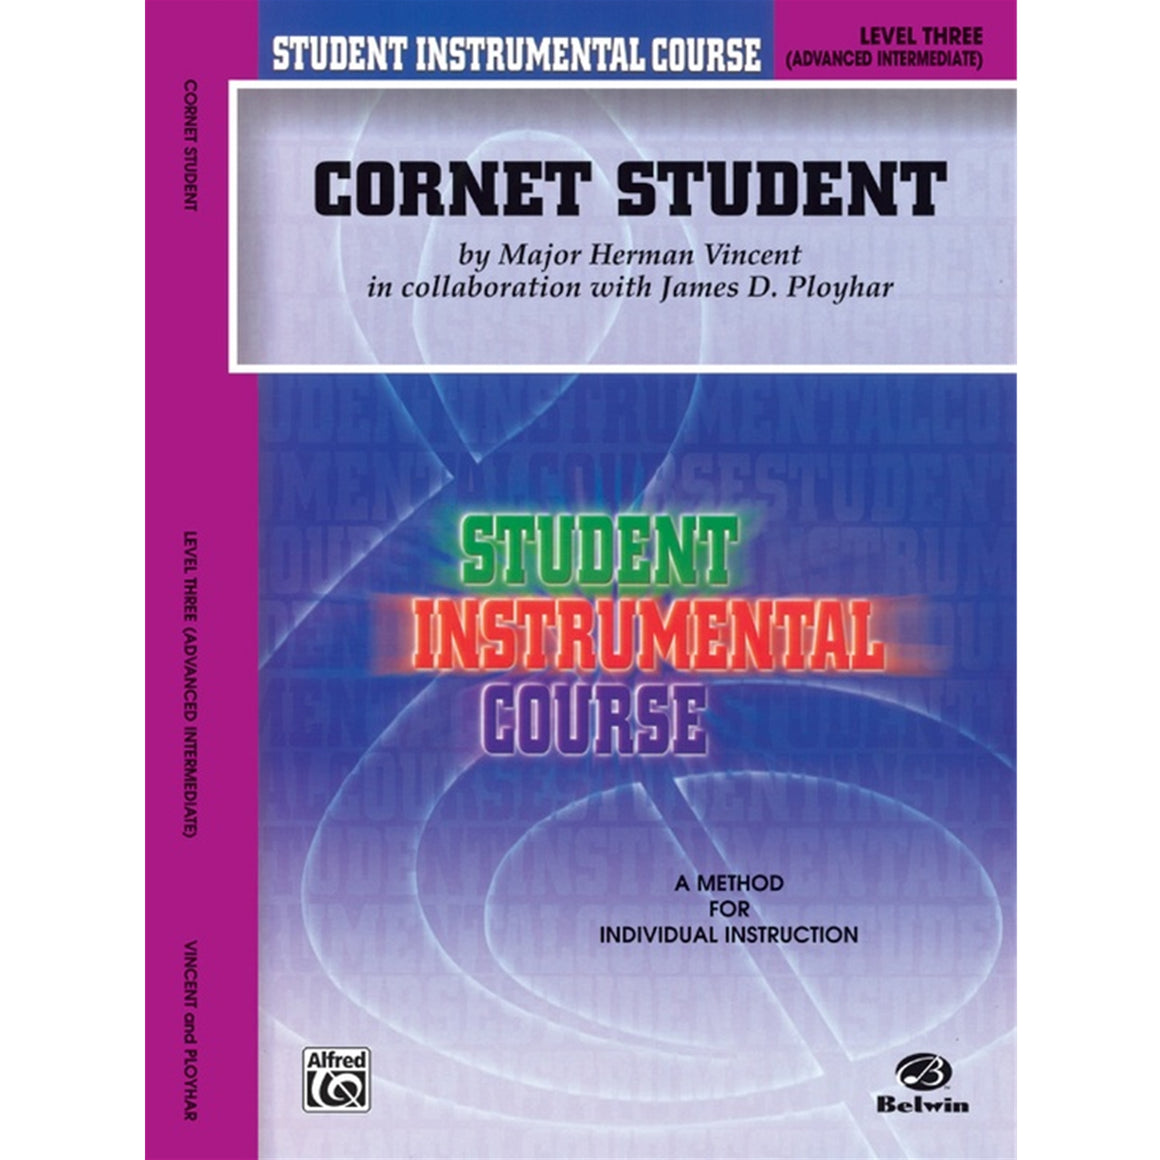 ALFRED 00BIC00346A Student Instrumental Course: Cornet Student, Level III [Trumpet]